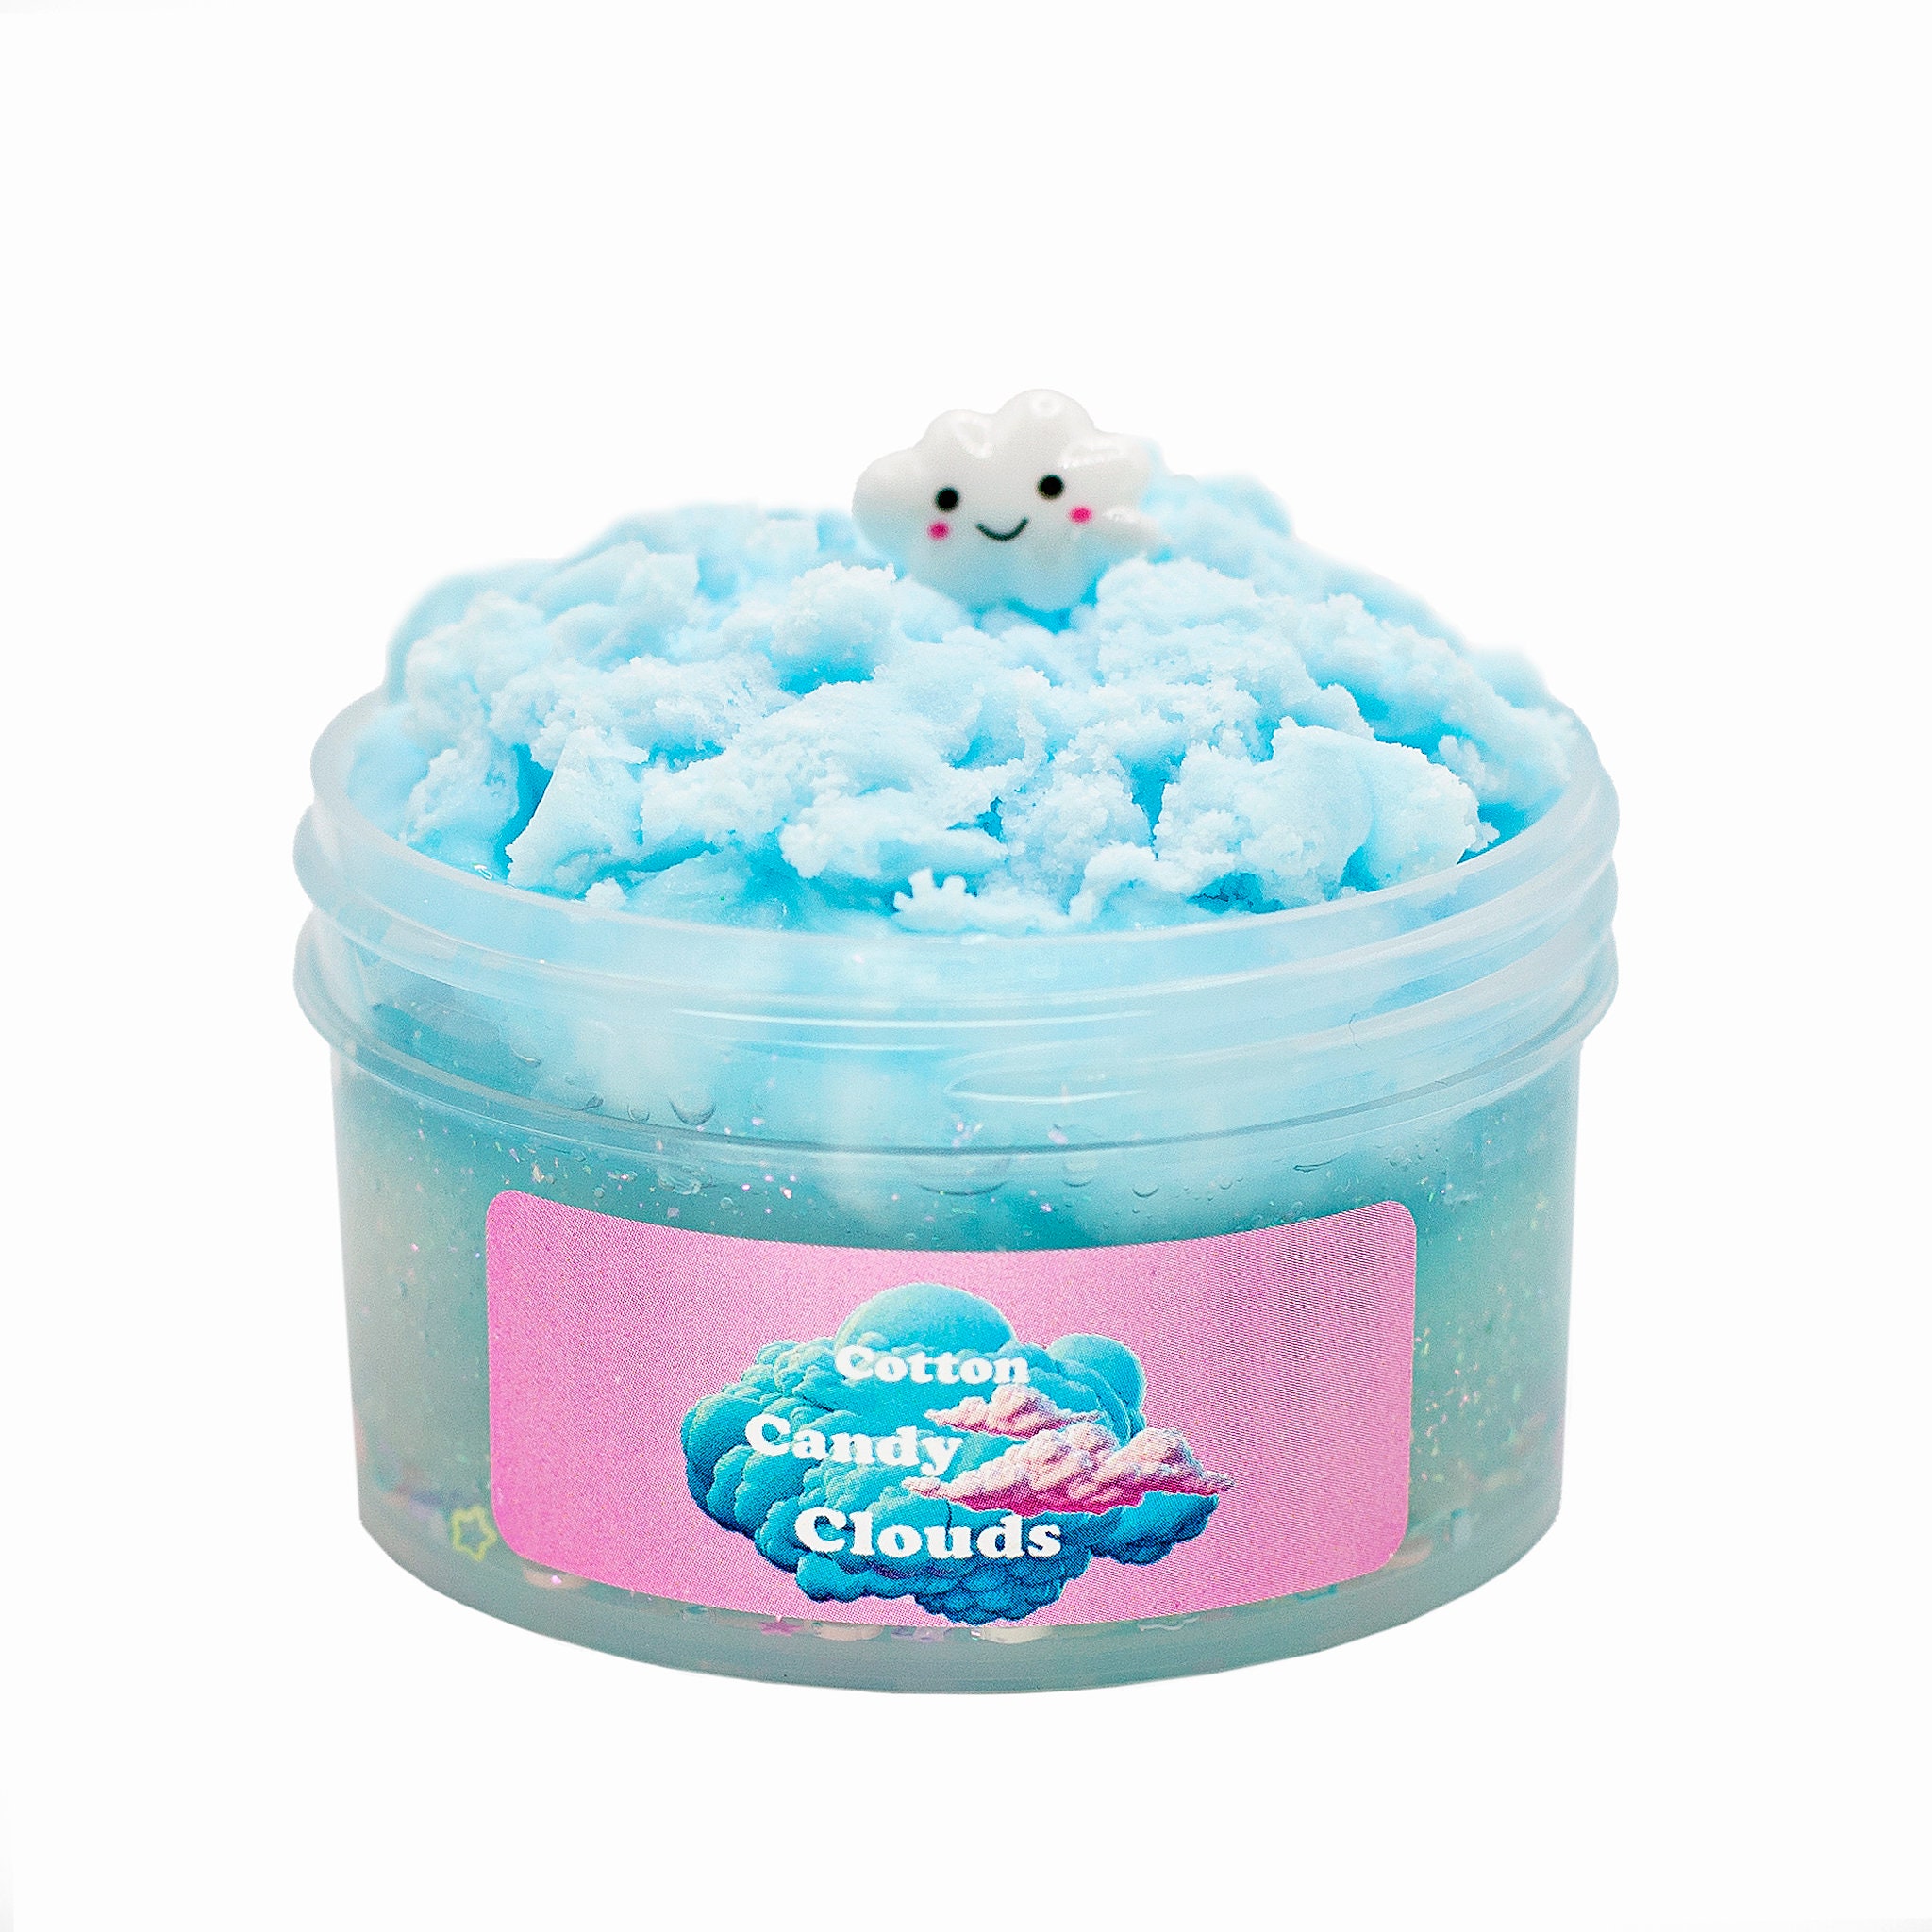 $1 CLOUD FLUFF SLIME! Making cloud cream and fluff from the dollar